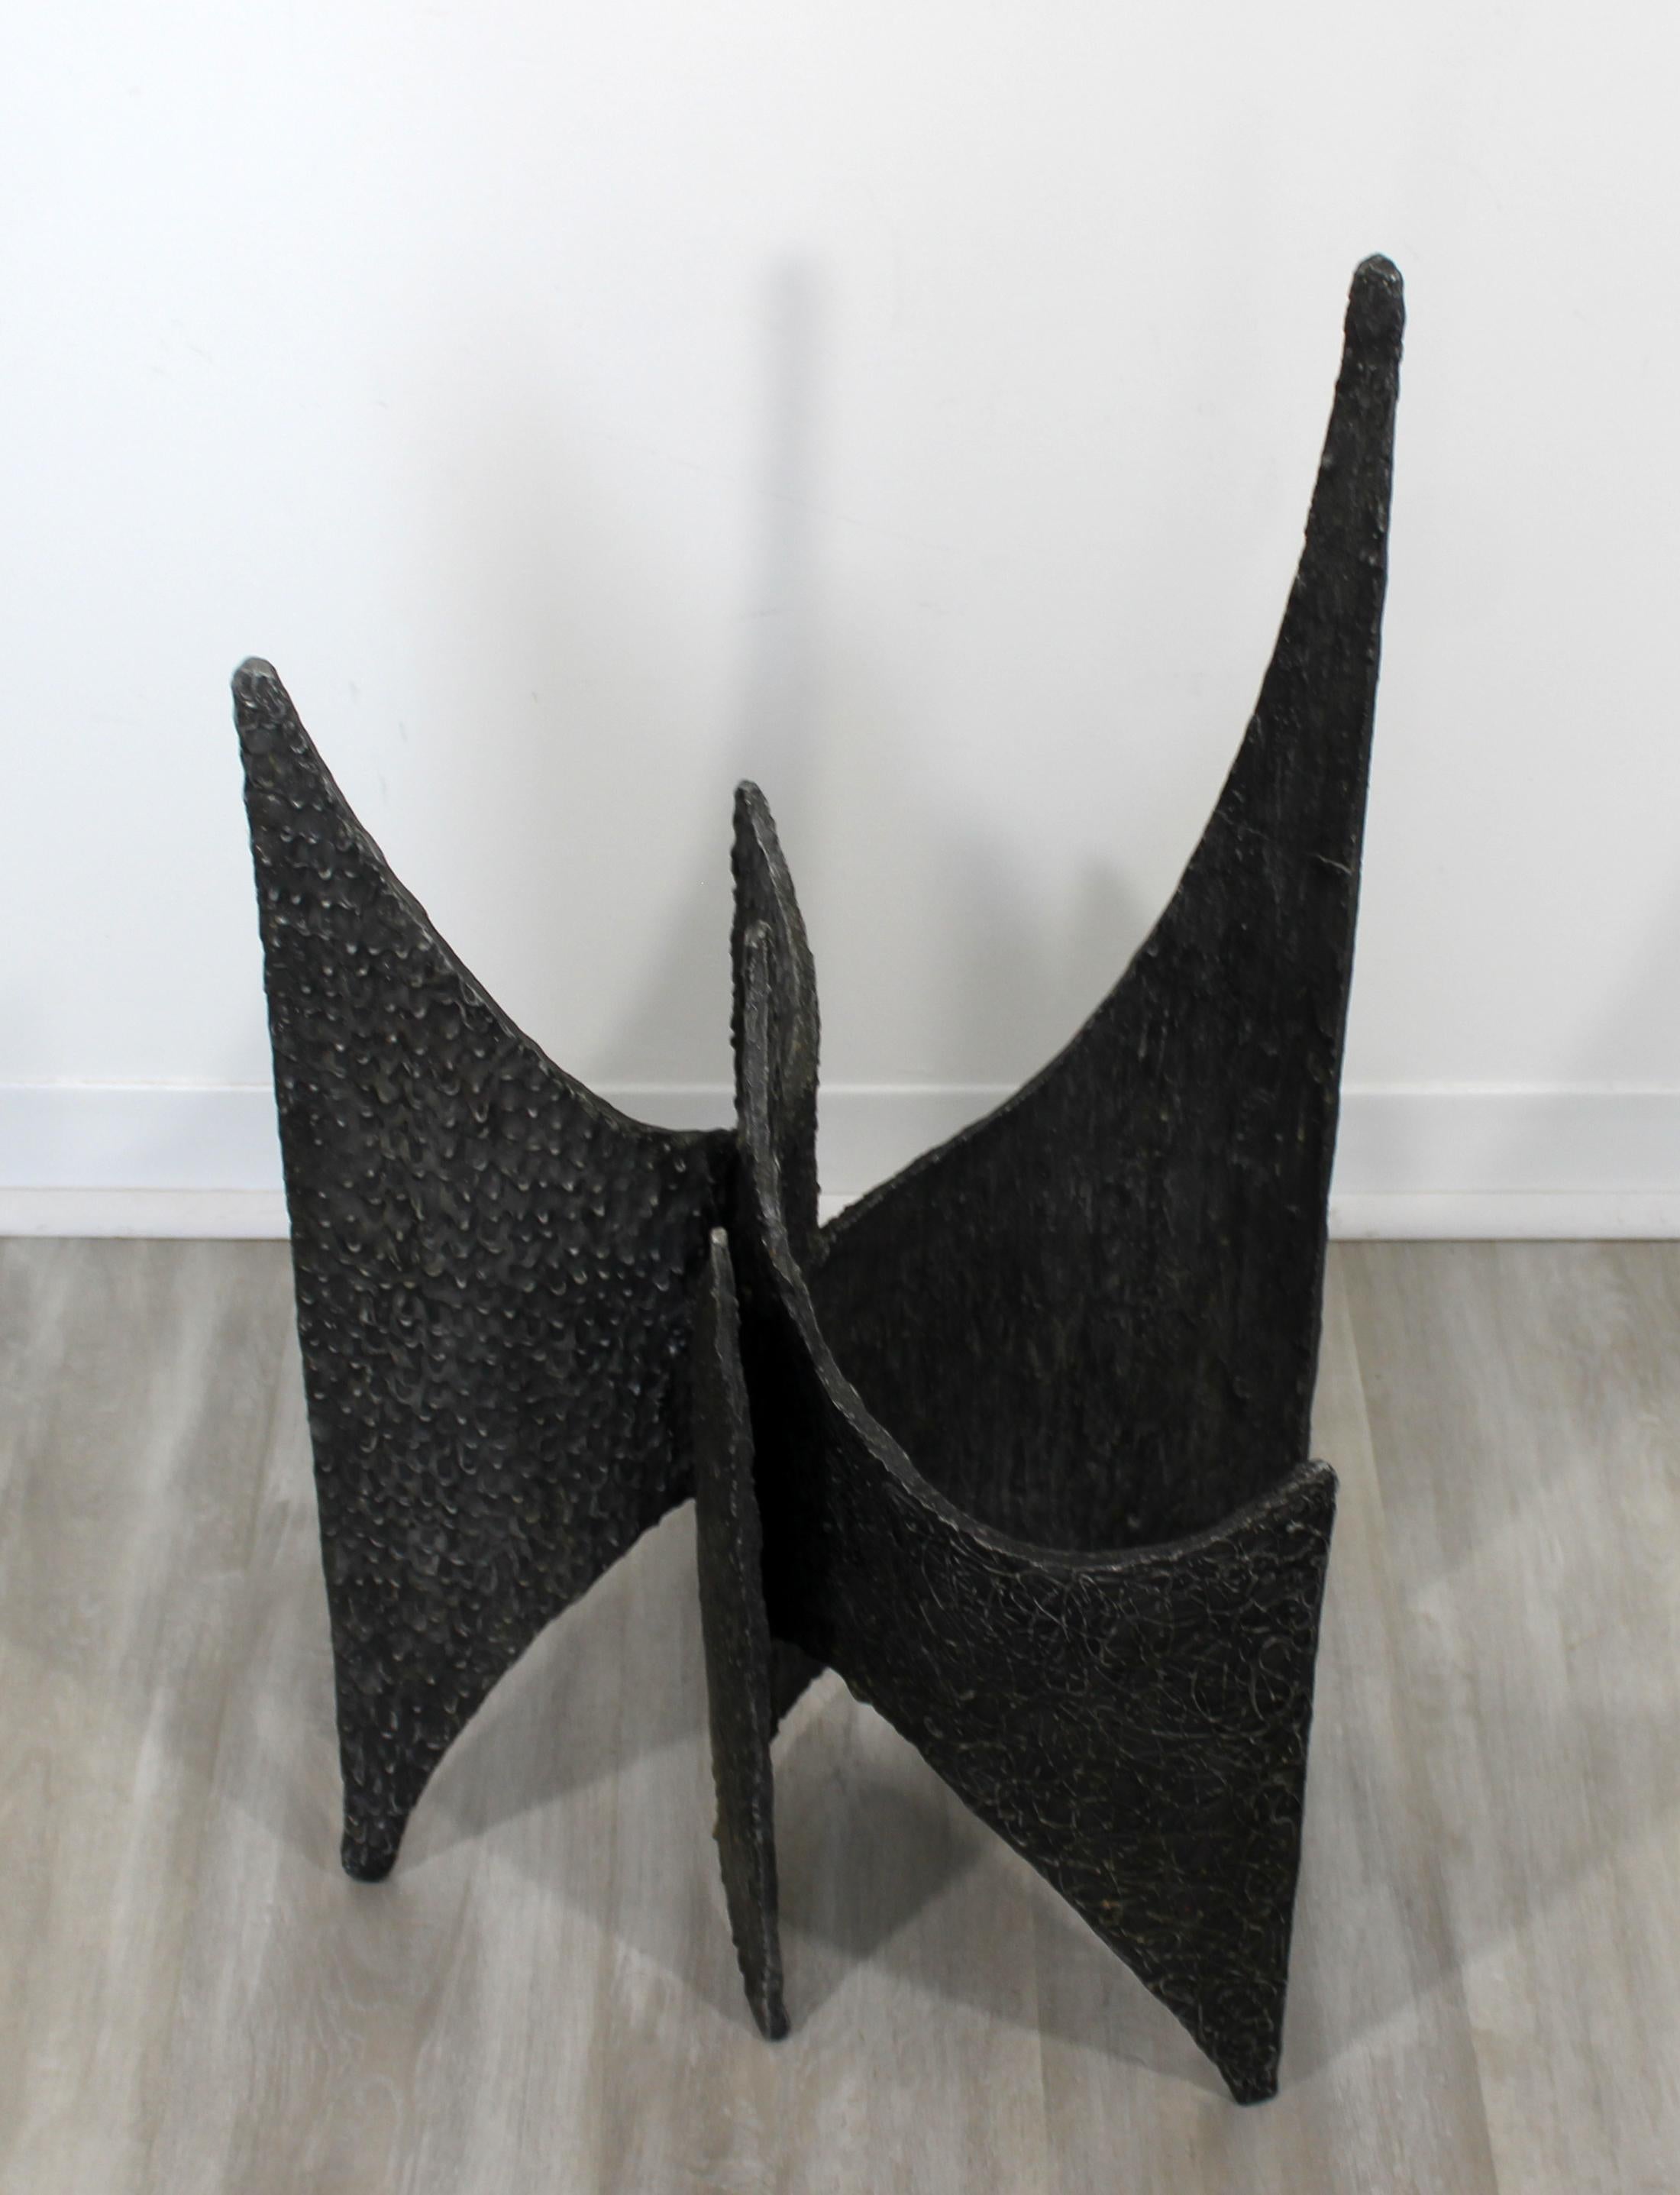 For your consideration is a fantastic, fiberglass, abstract table sculpture, in the style of Paul Evans or Adrian Pearsall. In excellent condition. The dimensions are 18